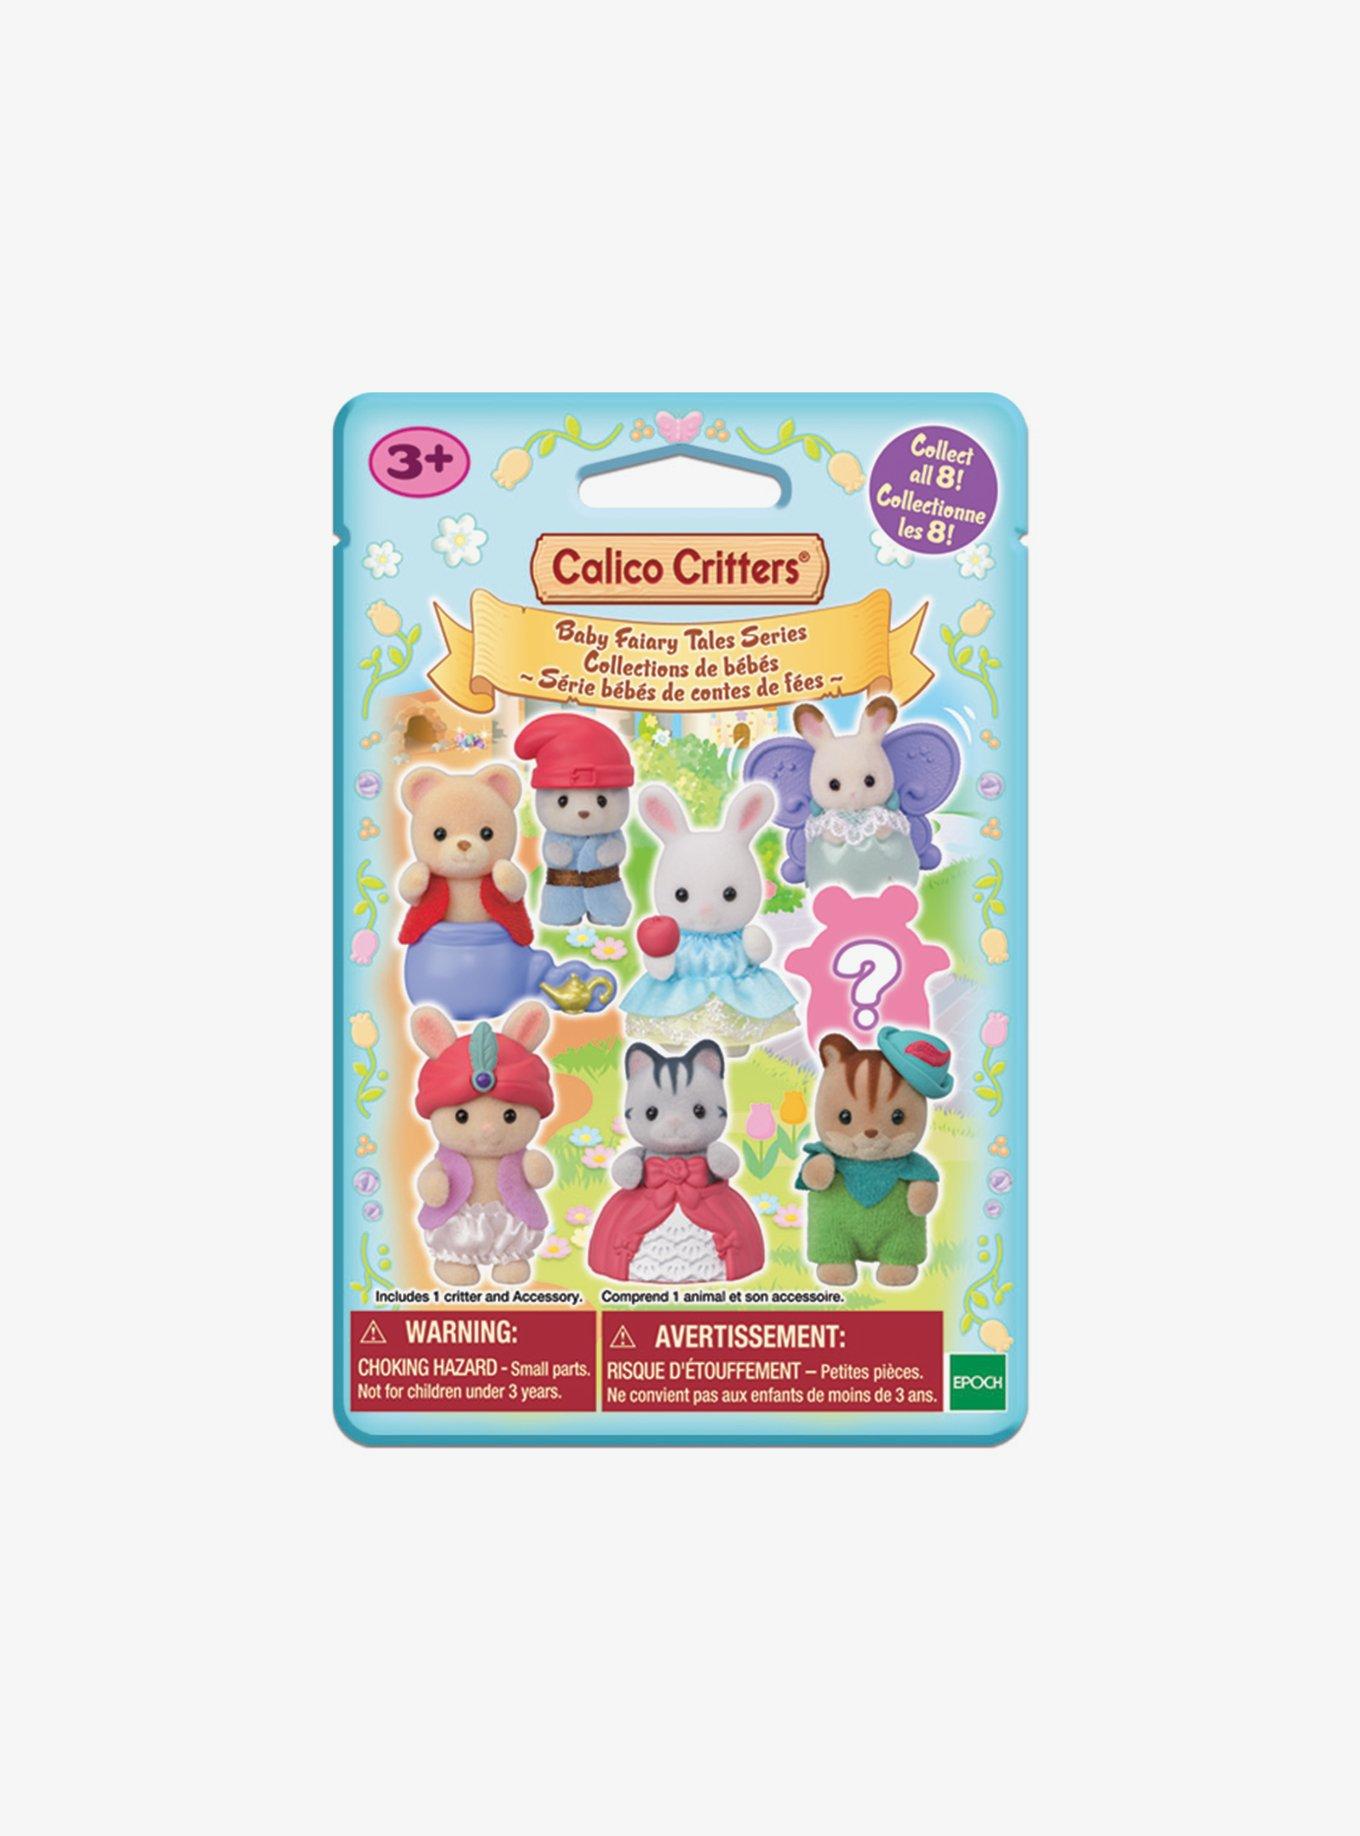 Calico Critters Magical Party Series VII Blind Bags - Assorted, 1